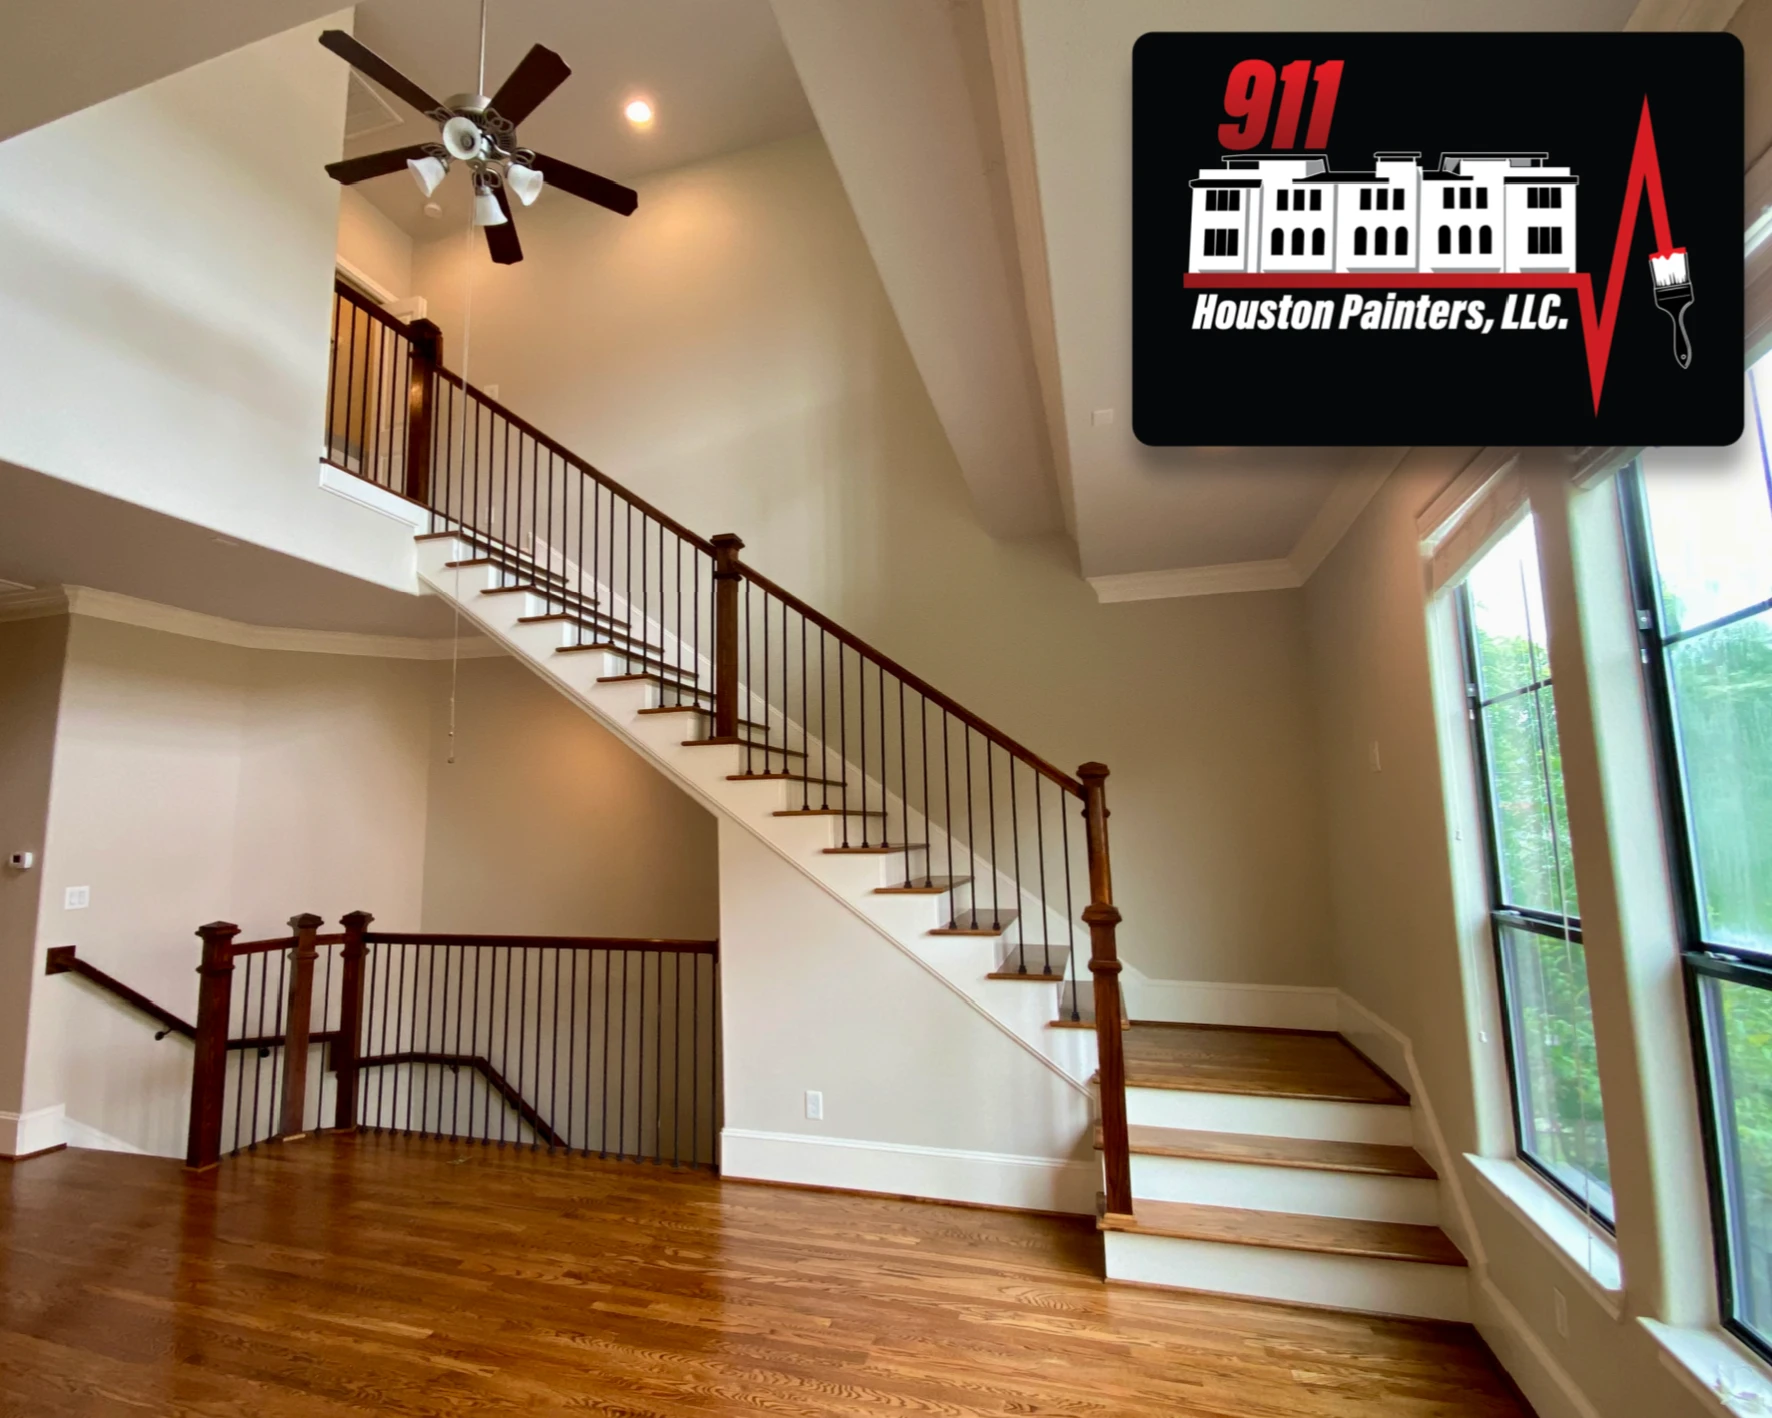 All Photos for 911 Houston Painters, LLC in Houston, TX